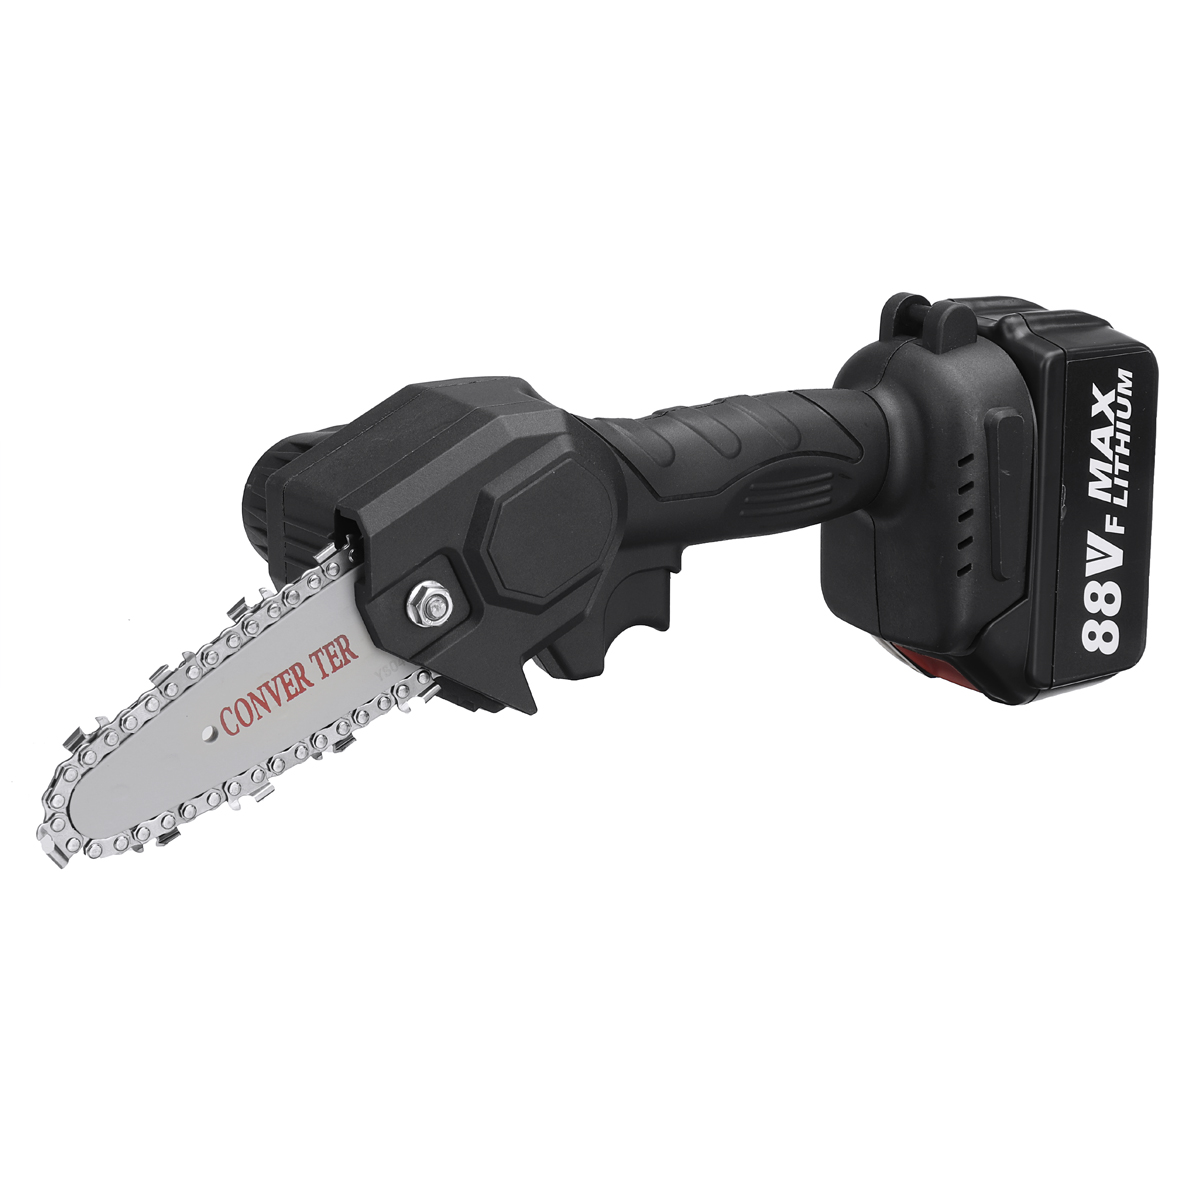 4-Inch-15000mAh-Mini-Electric-Chain-Saw-Pruning-Chainsaw-Cordless-Garden-Tree-Logging-Trimming-Saw-F-1799643-9